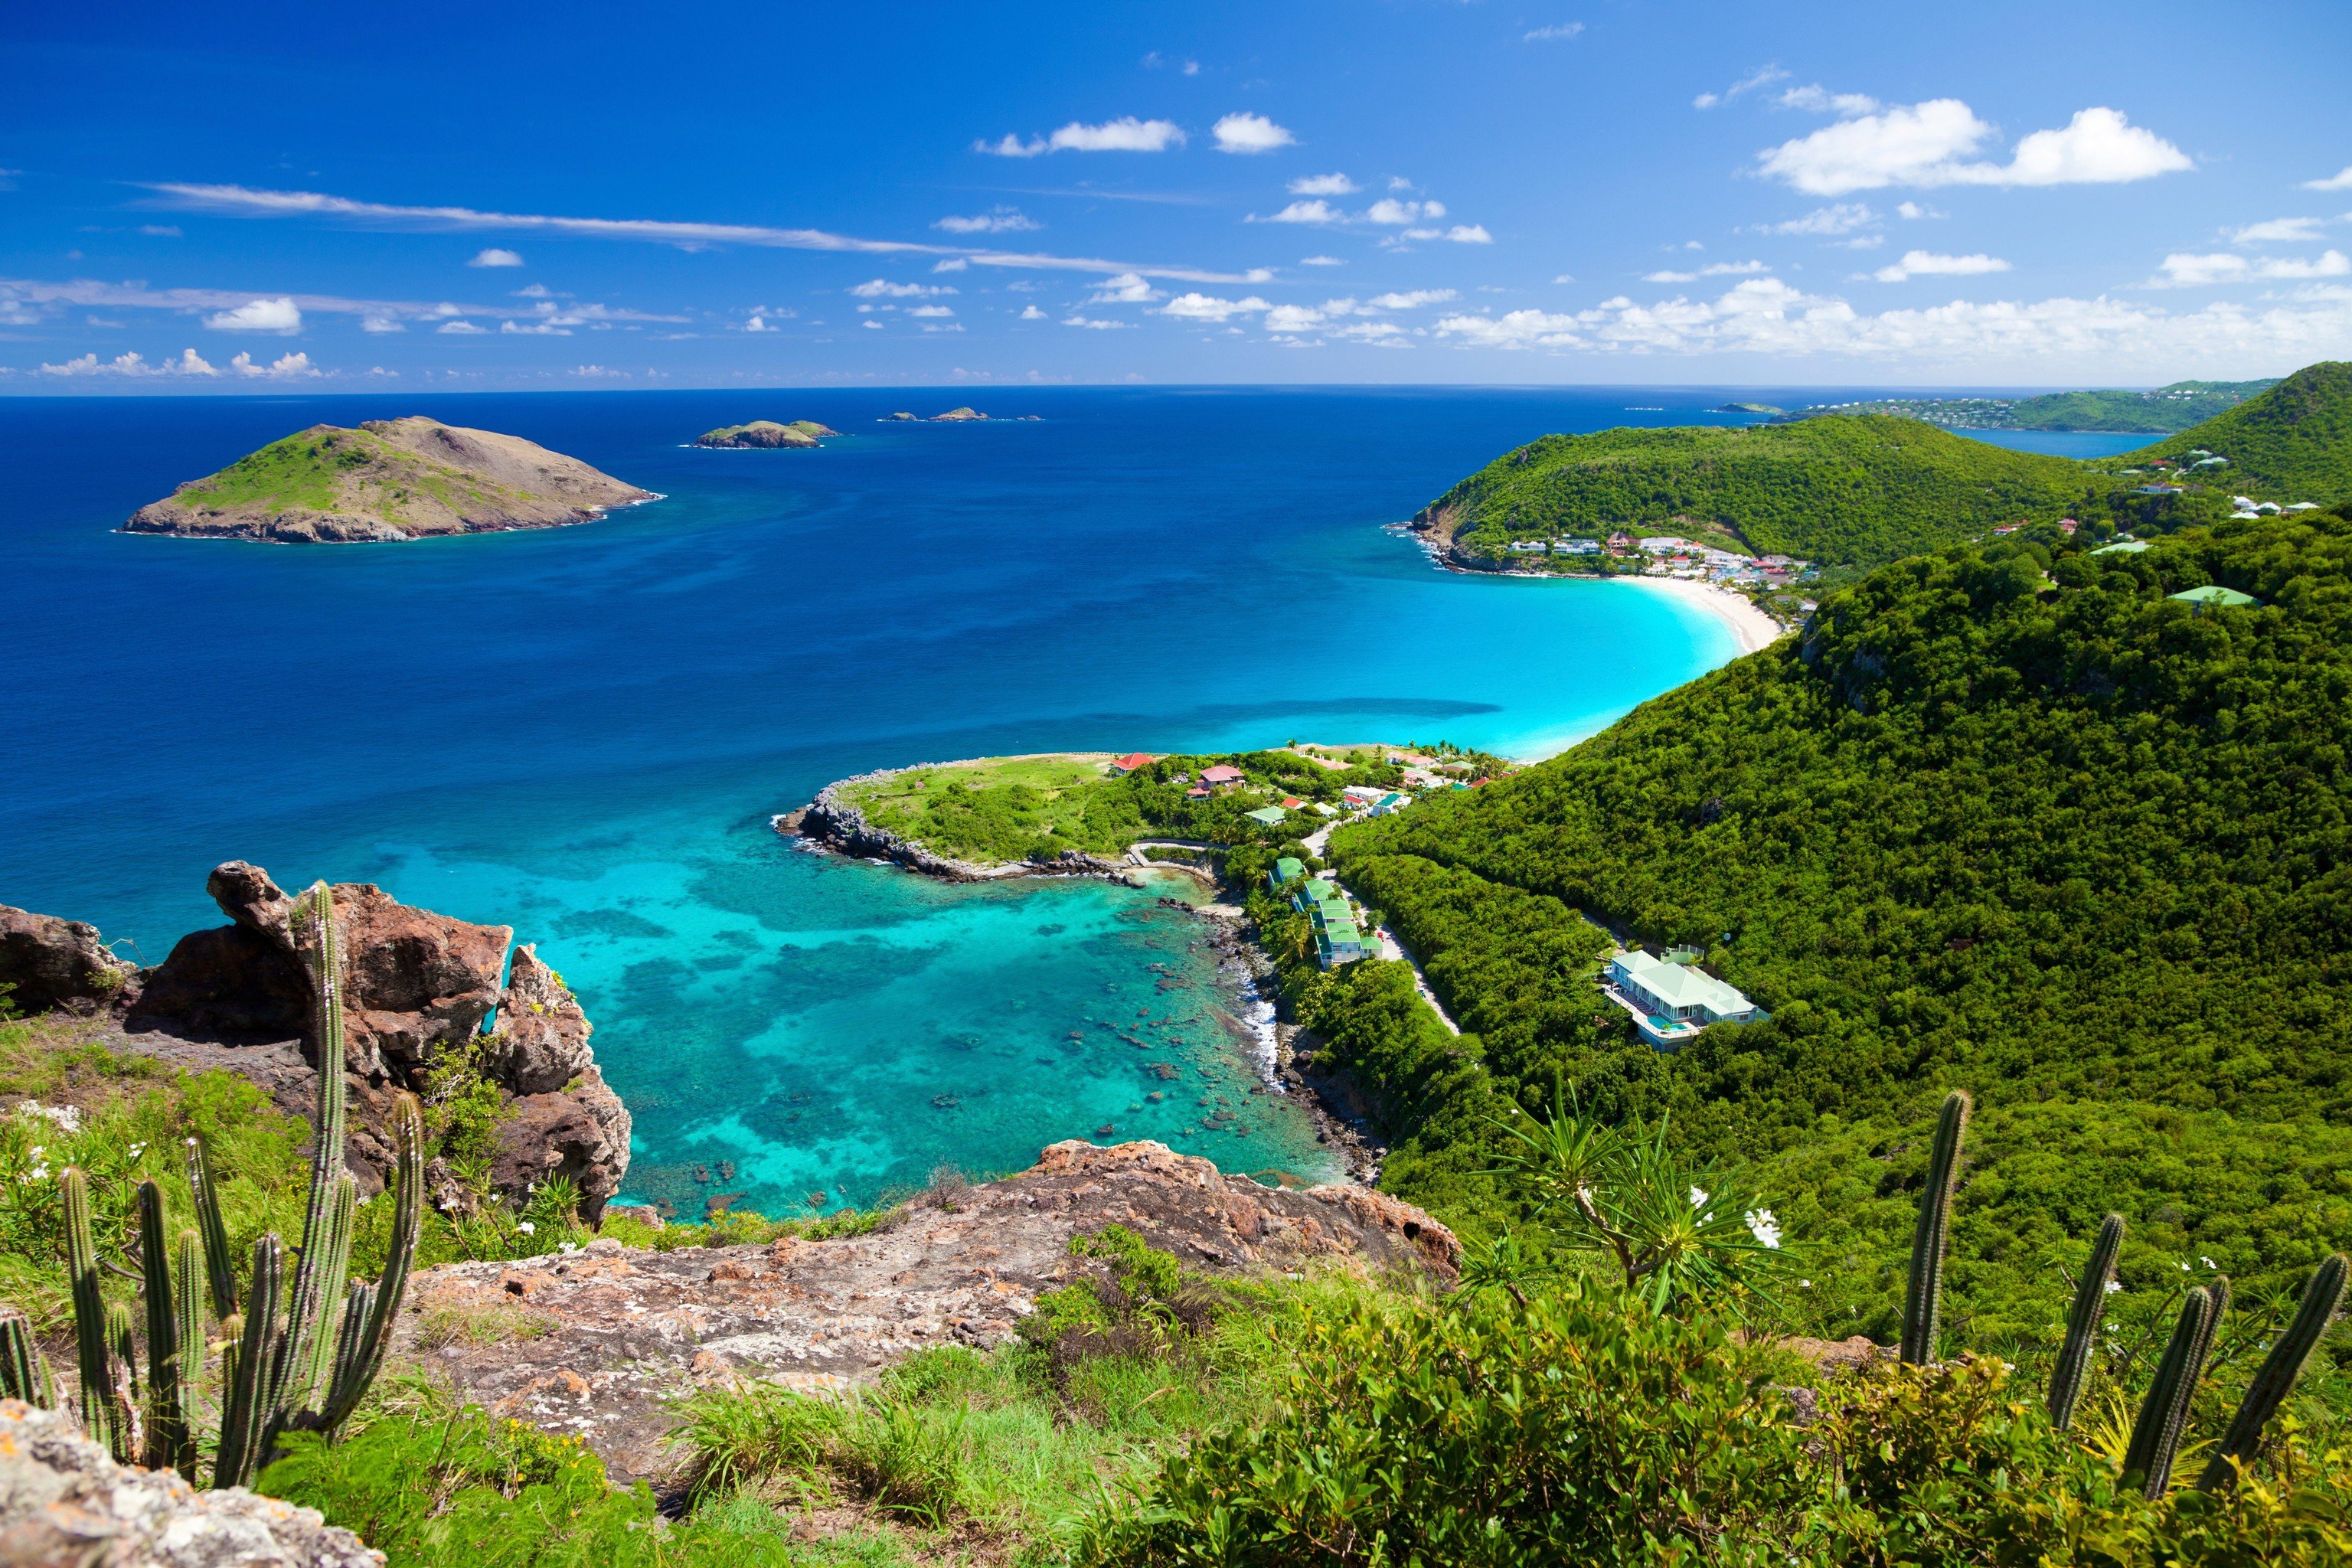 14 BEST Things to Do in St. Barts Now (2019) | Jetsetter